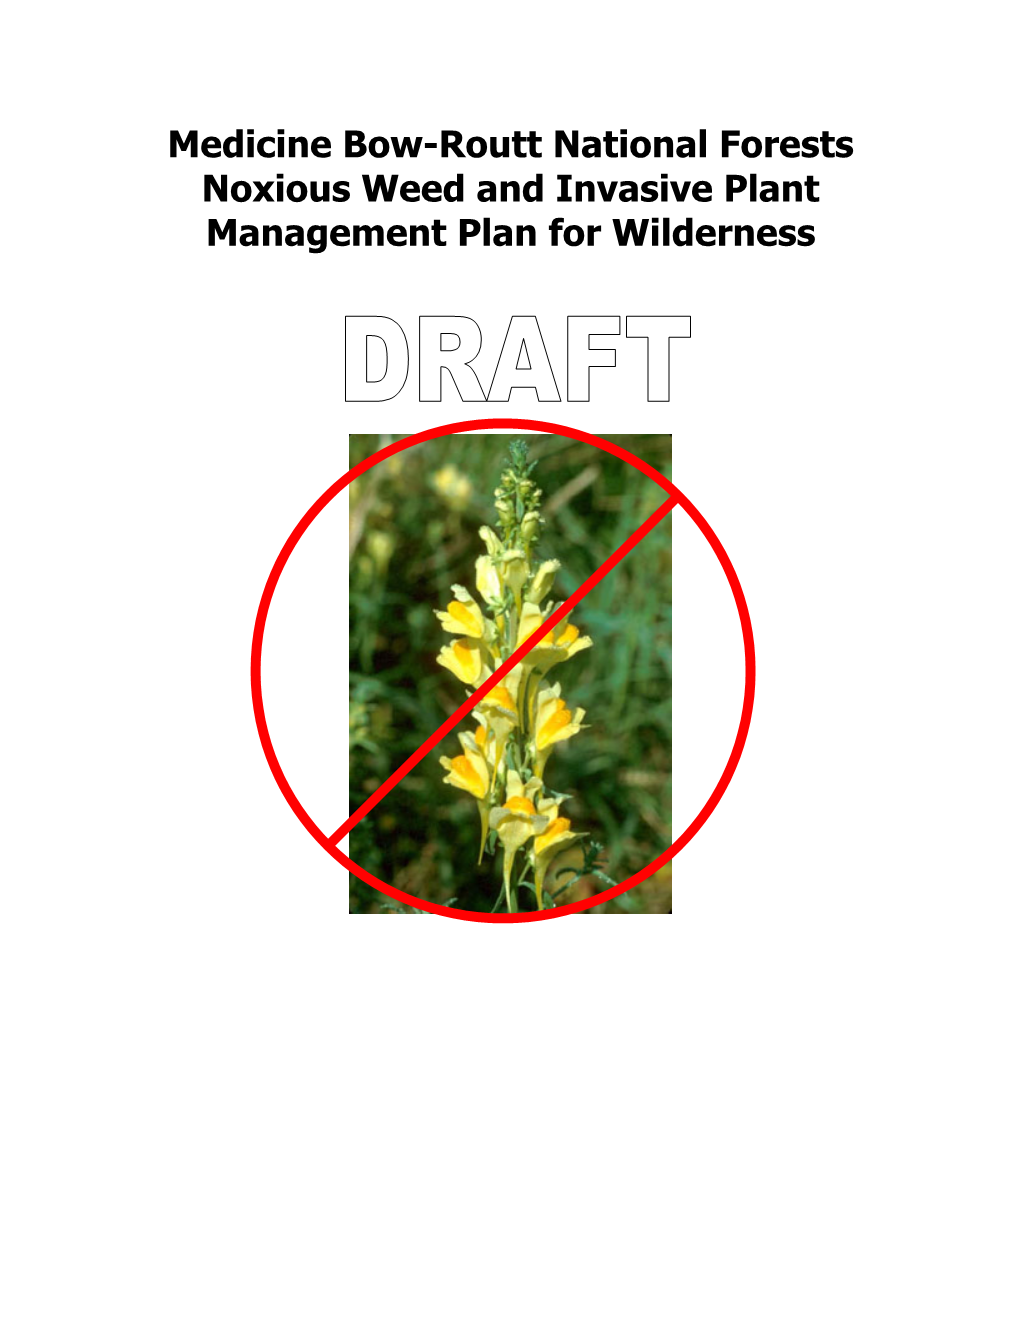 Noxious Weed and Invasive Plant Management Plan for Wilderness